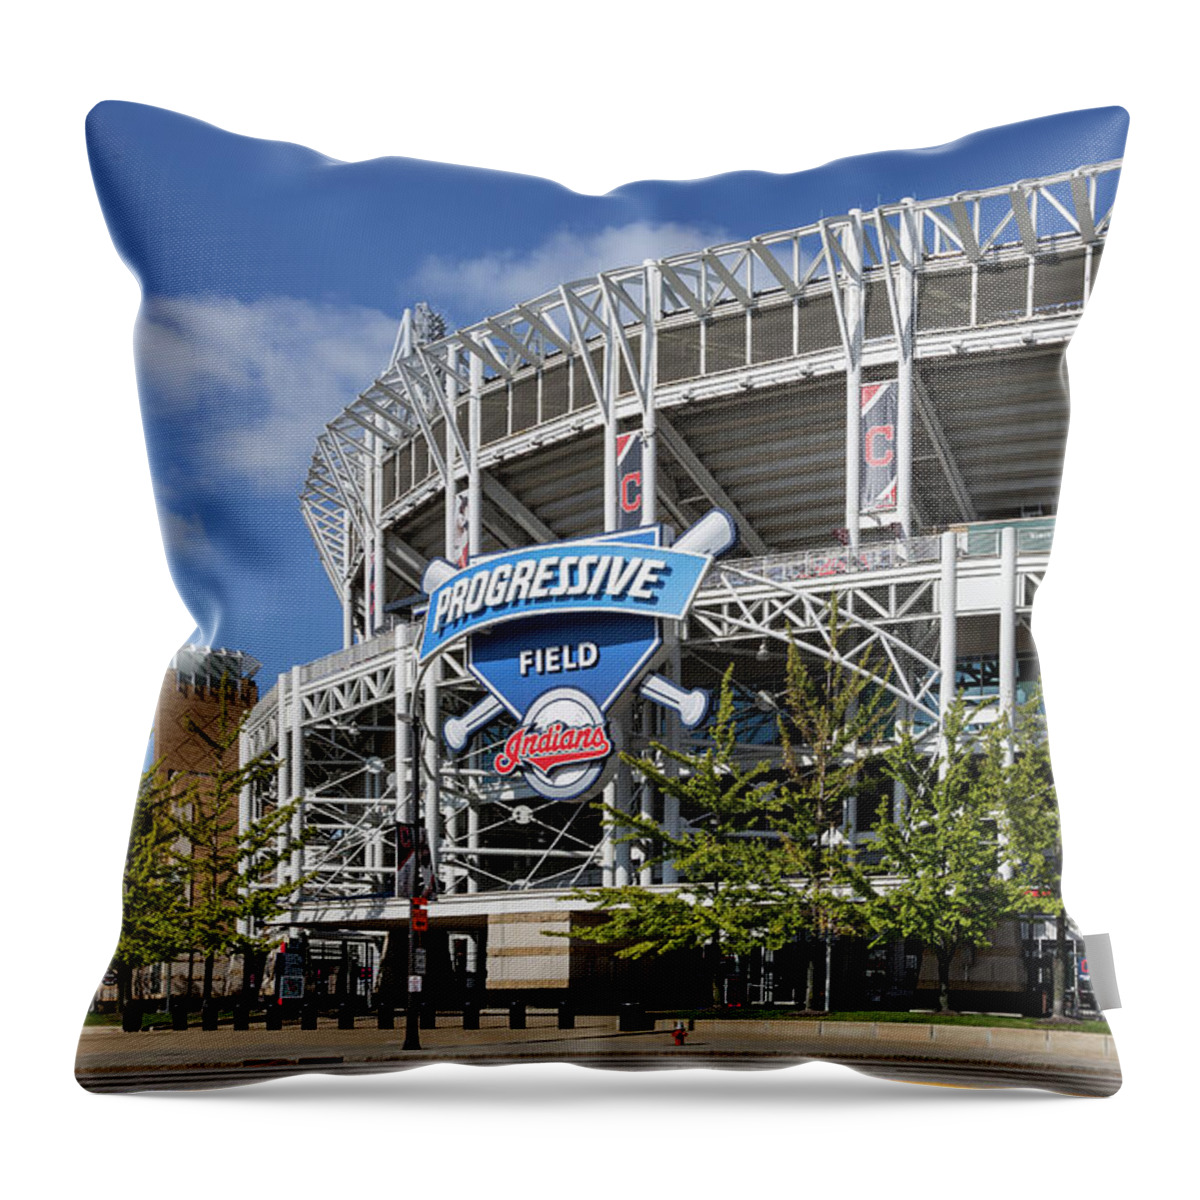 Progressive Field Throw Pillow featuring the photograph Progressive Field In Cleveland Ohio by Dale Kincaid